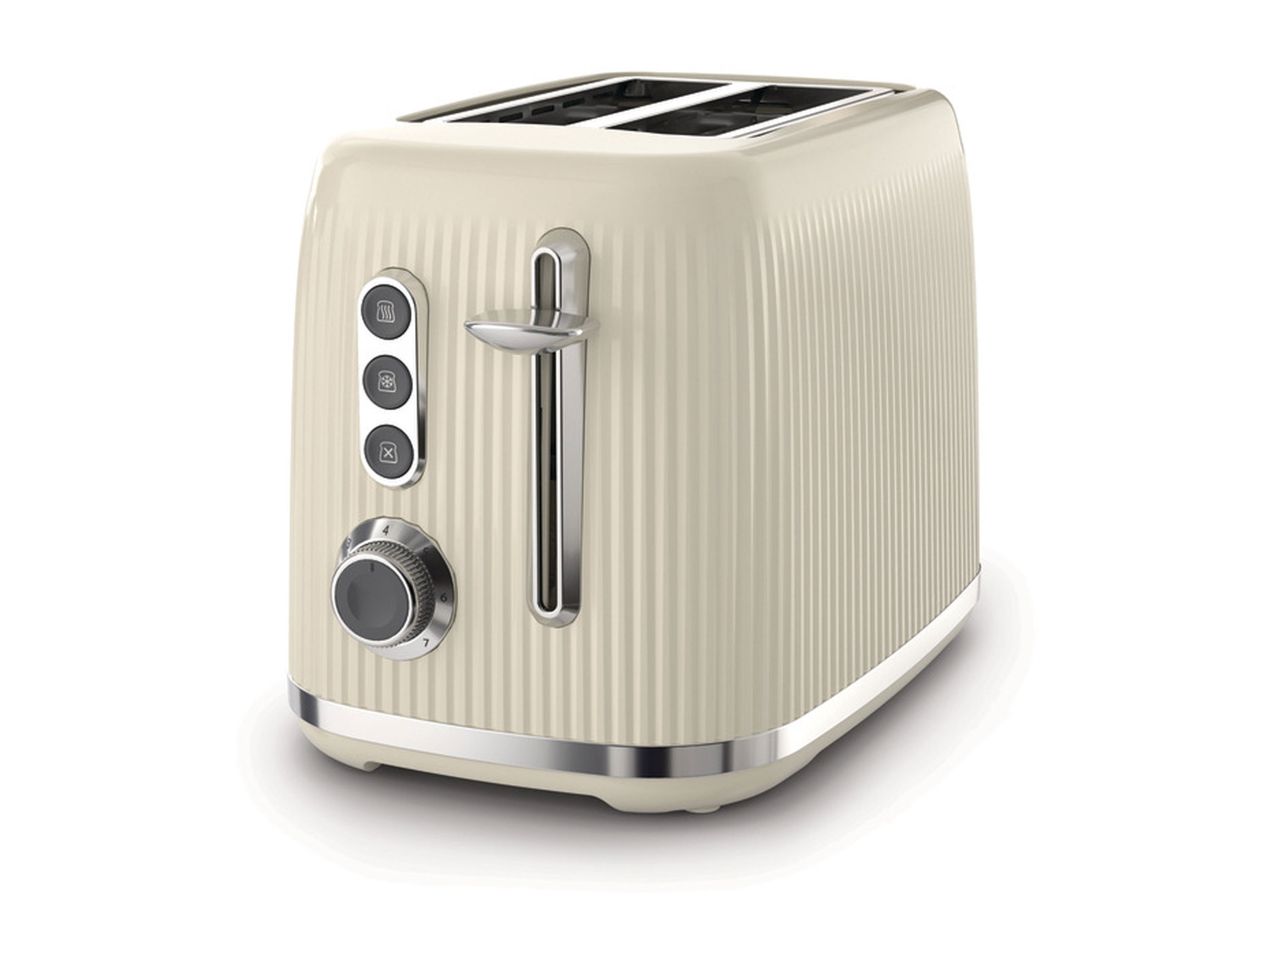 Go to full screen view: Breville Bold 2 Slice Toaster - Cream - Image 2